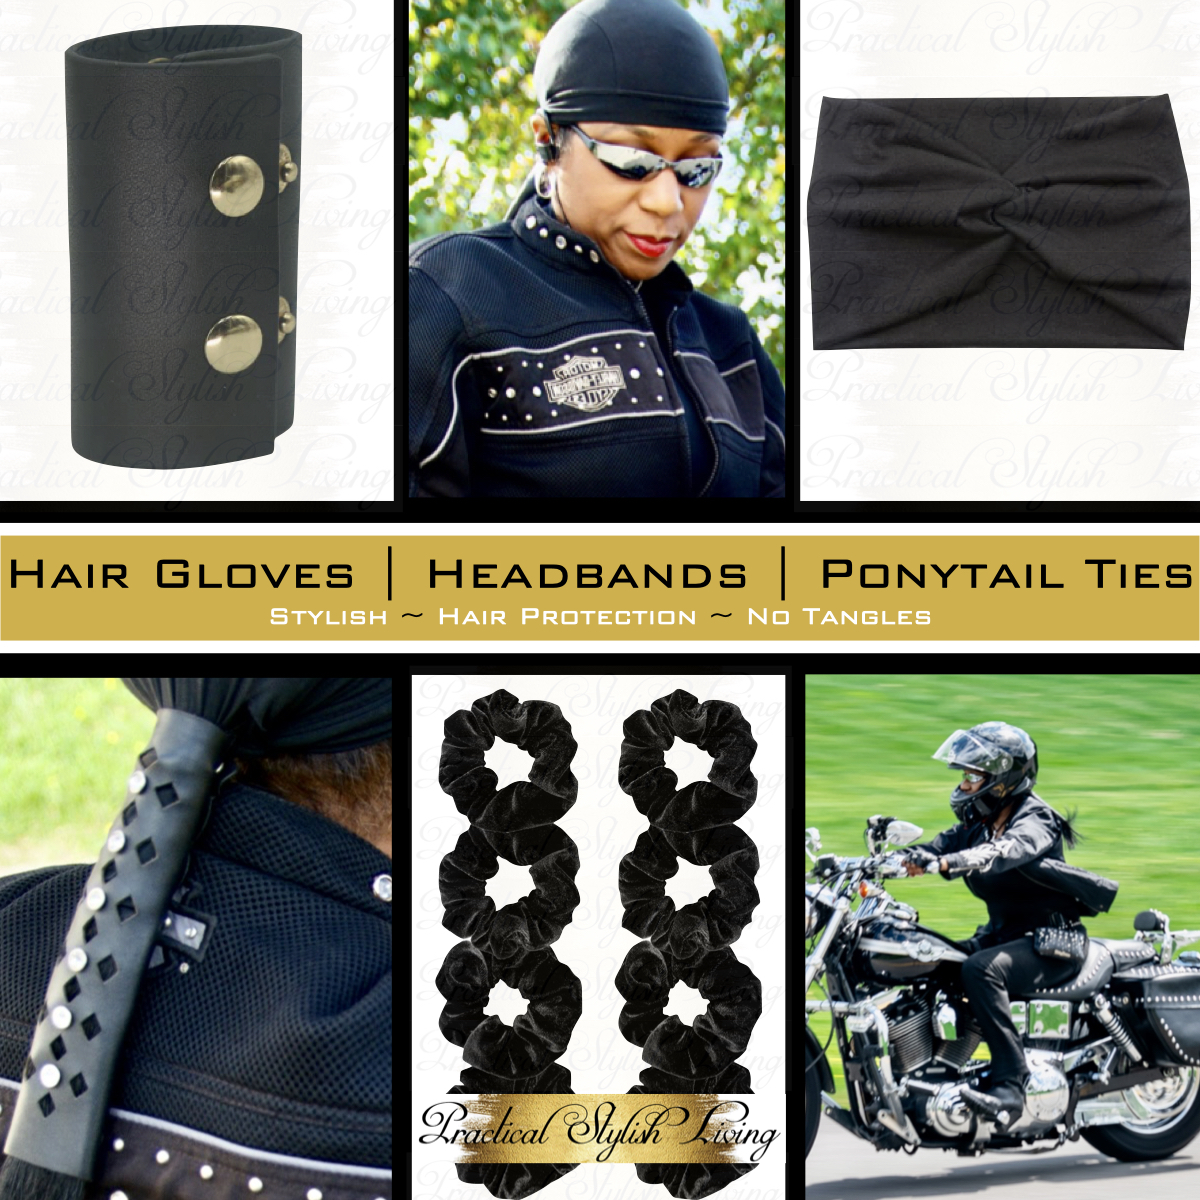 Hair Gloves Headbands Ponytail Ties | Motorcycle Hair Accessories | Practical Stylish Living | Motorcycle Lifestyle